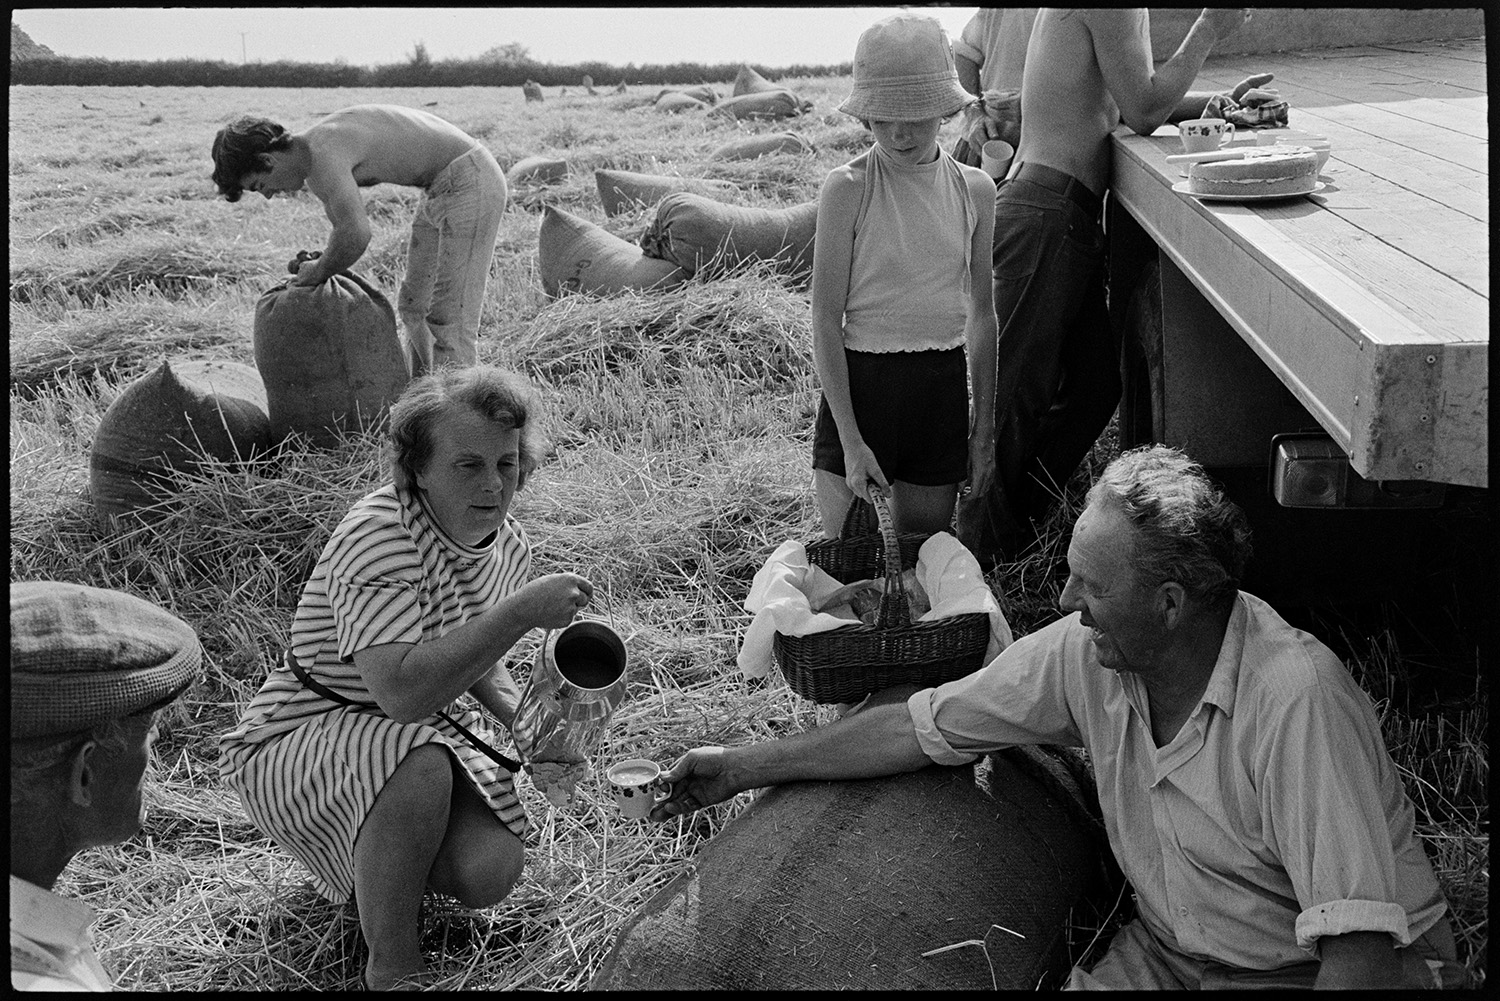 Harvesters tea break in field. 
[Hettie Ward bringing tea and cake to the Ward family who are harvesting in a field at Parsonage, Iddesleigh. She is pouring tea from an urn into a china cup held by John Ward. A girl is also stood holding a basket of food by them and a cake can be seen on the trailer behind them.]